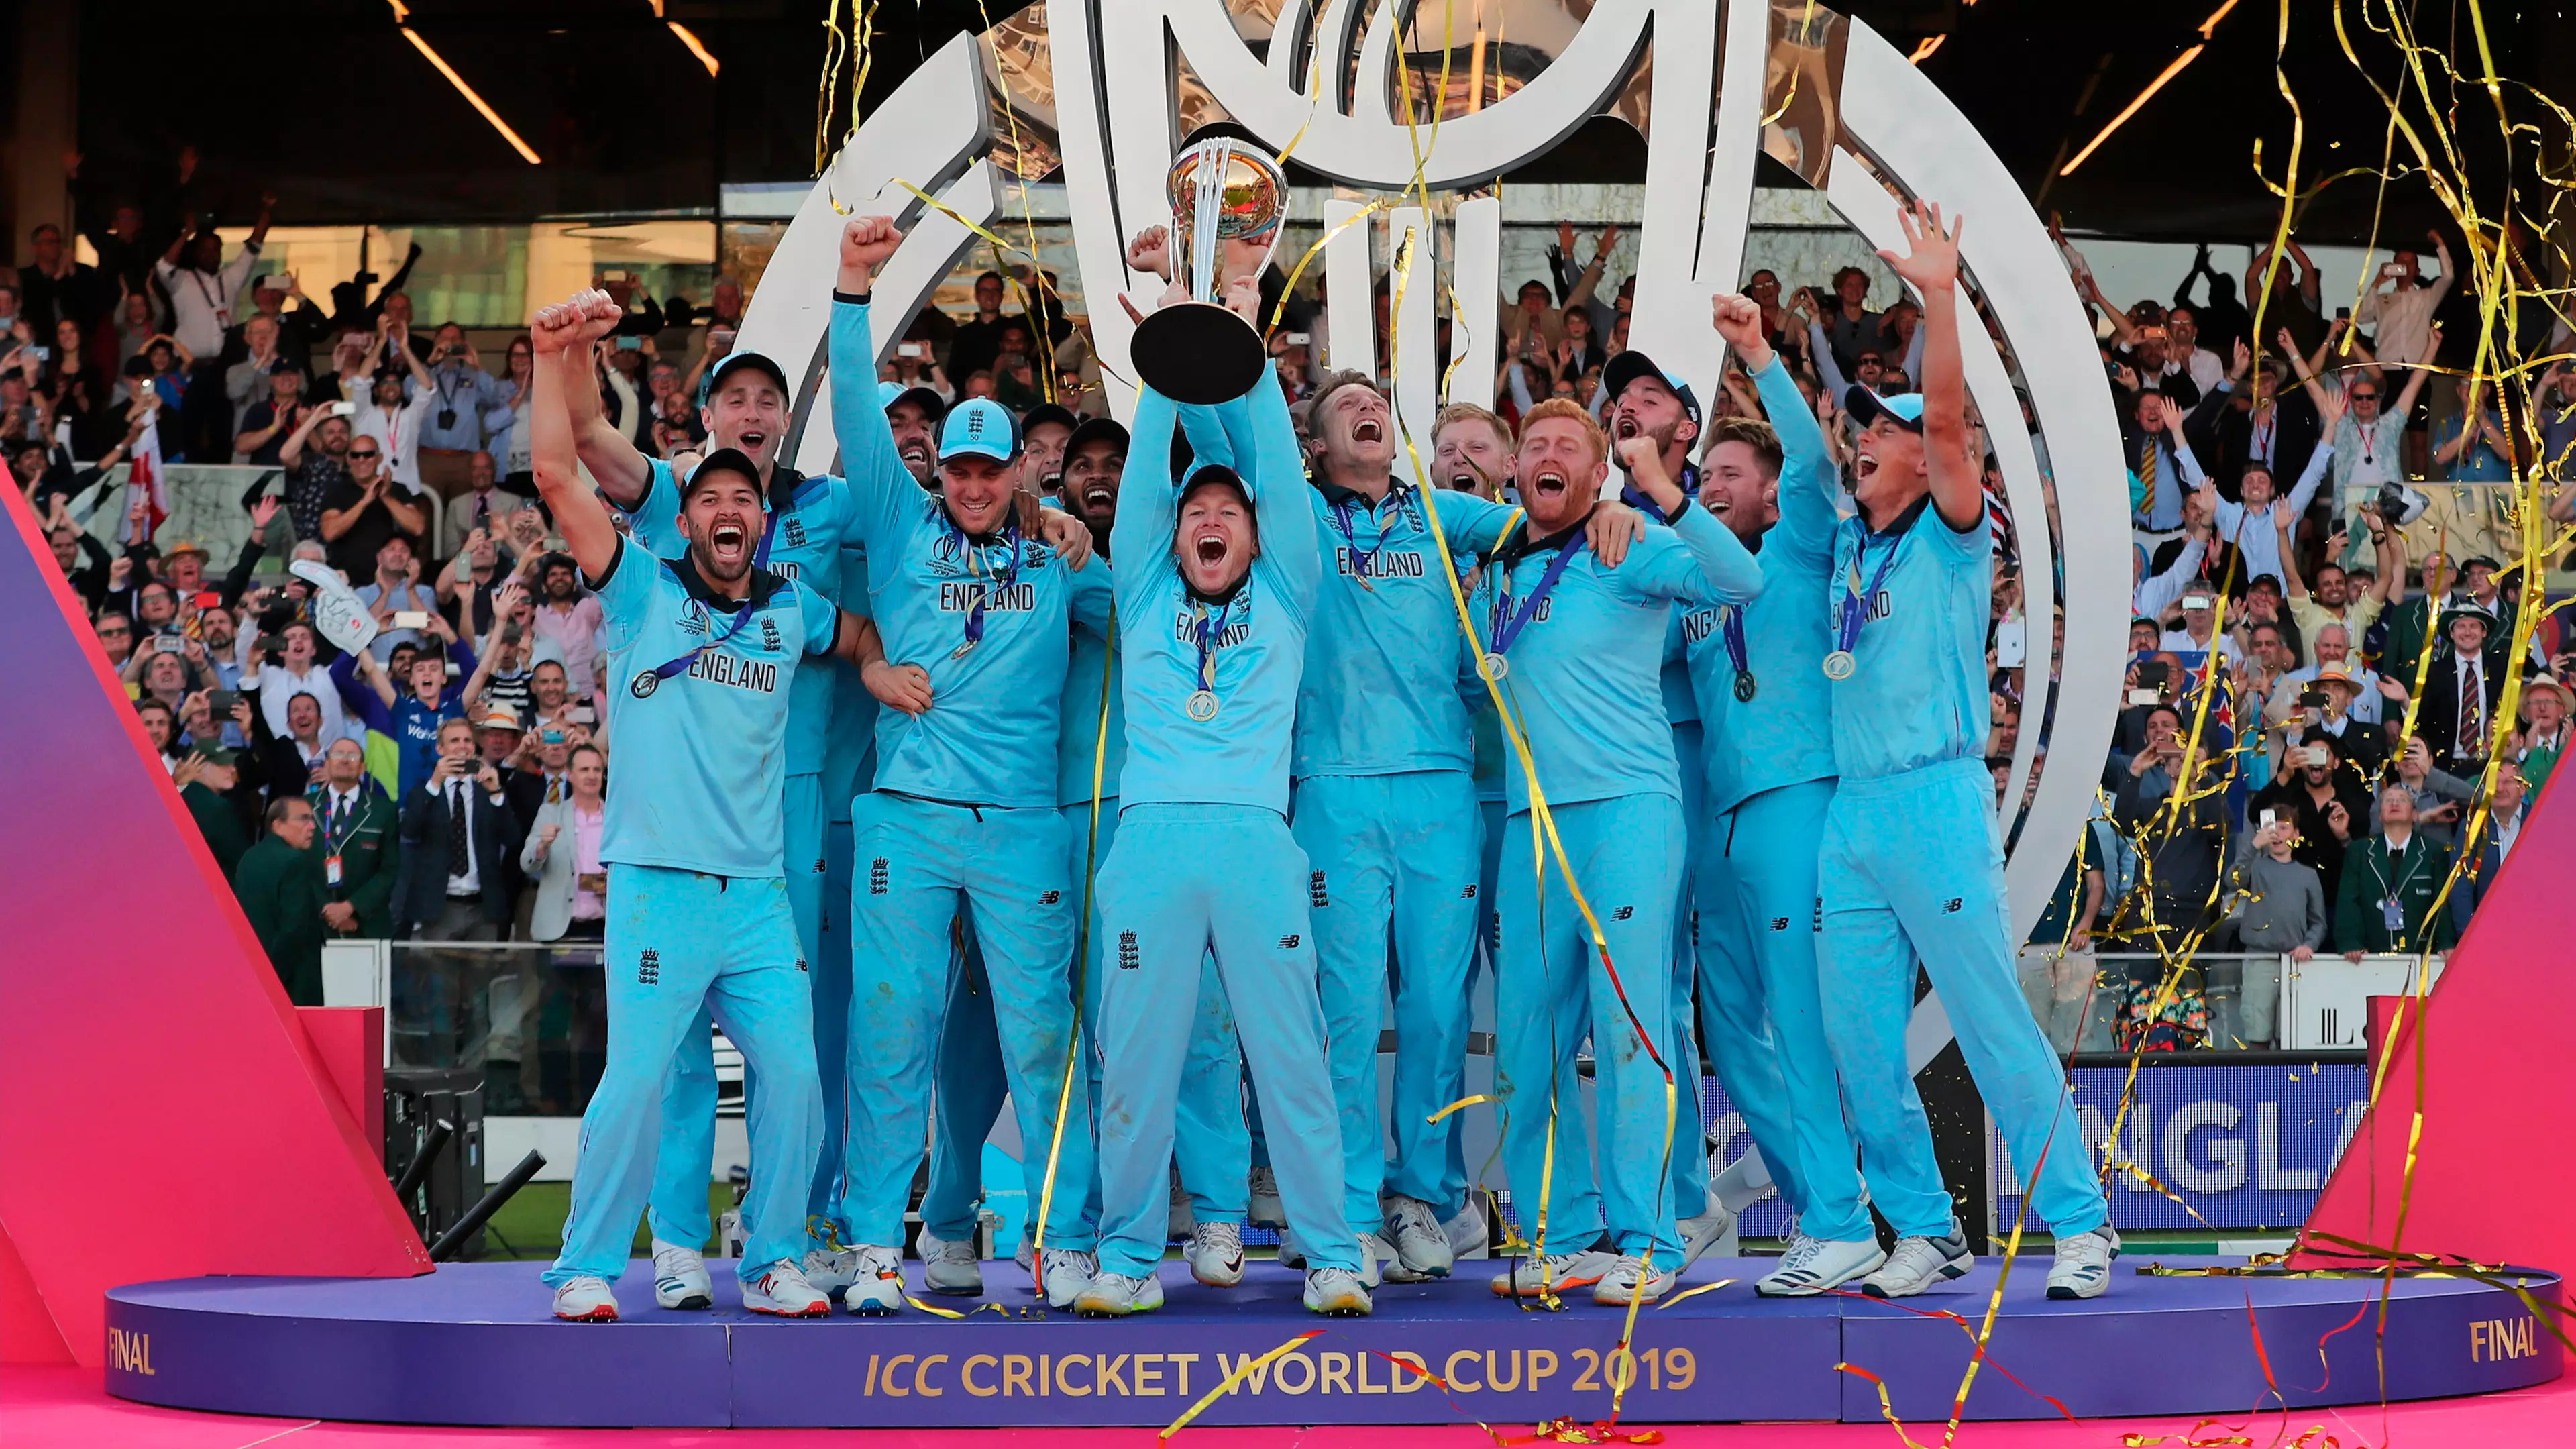 Top Umpire Says That England Shouldn't Have Won Cricket World Cup